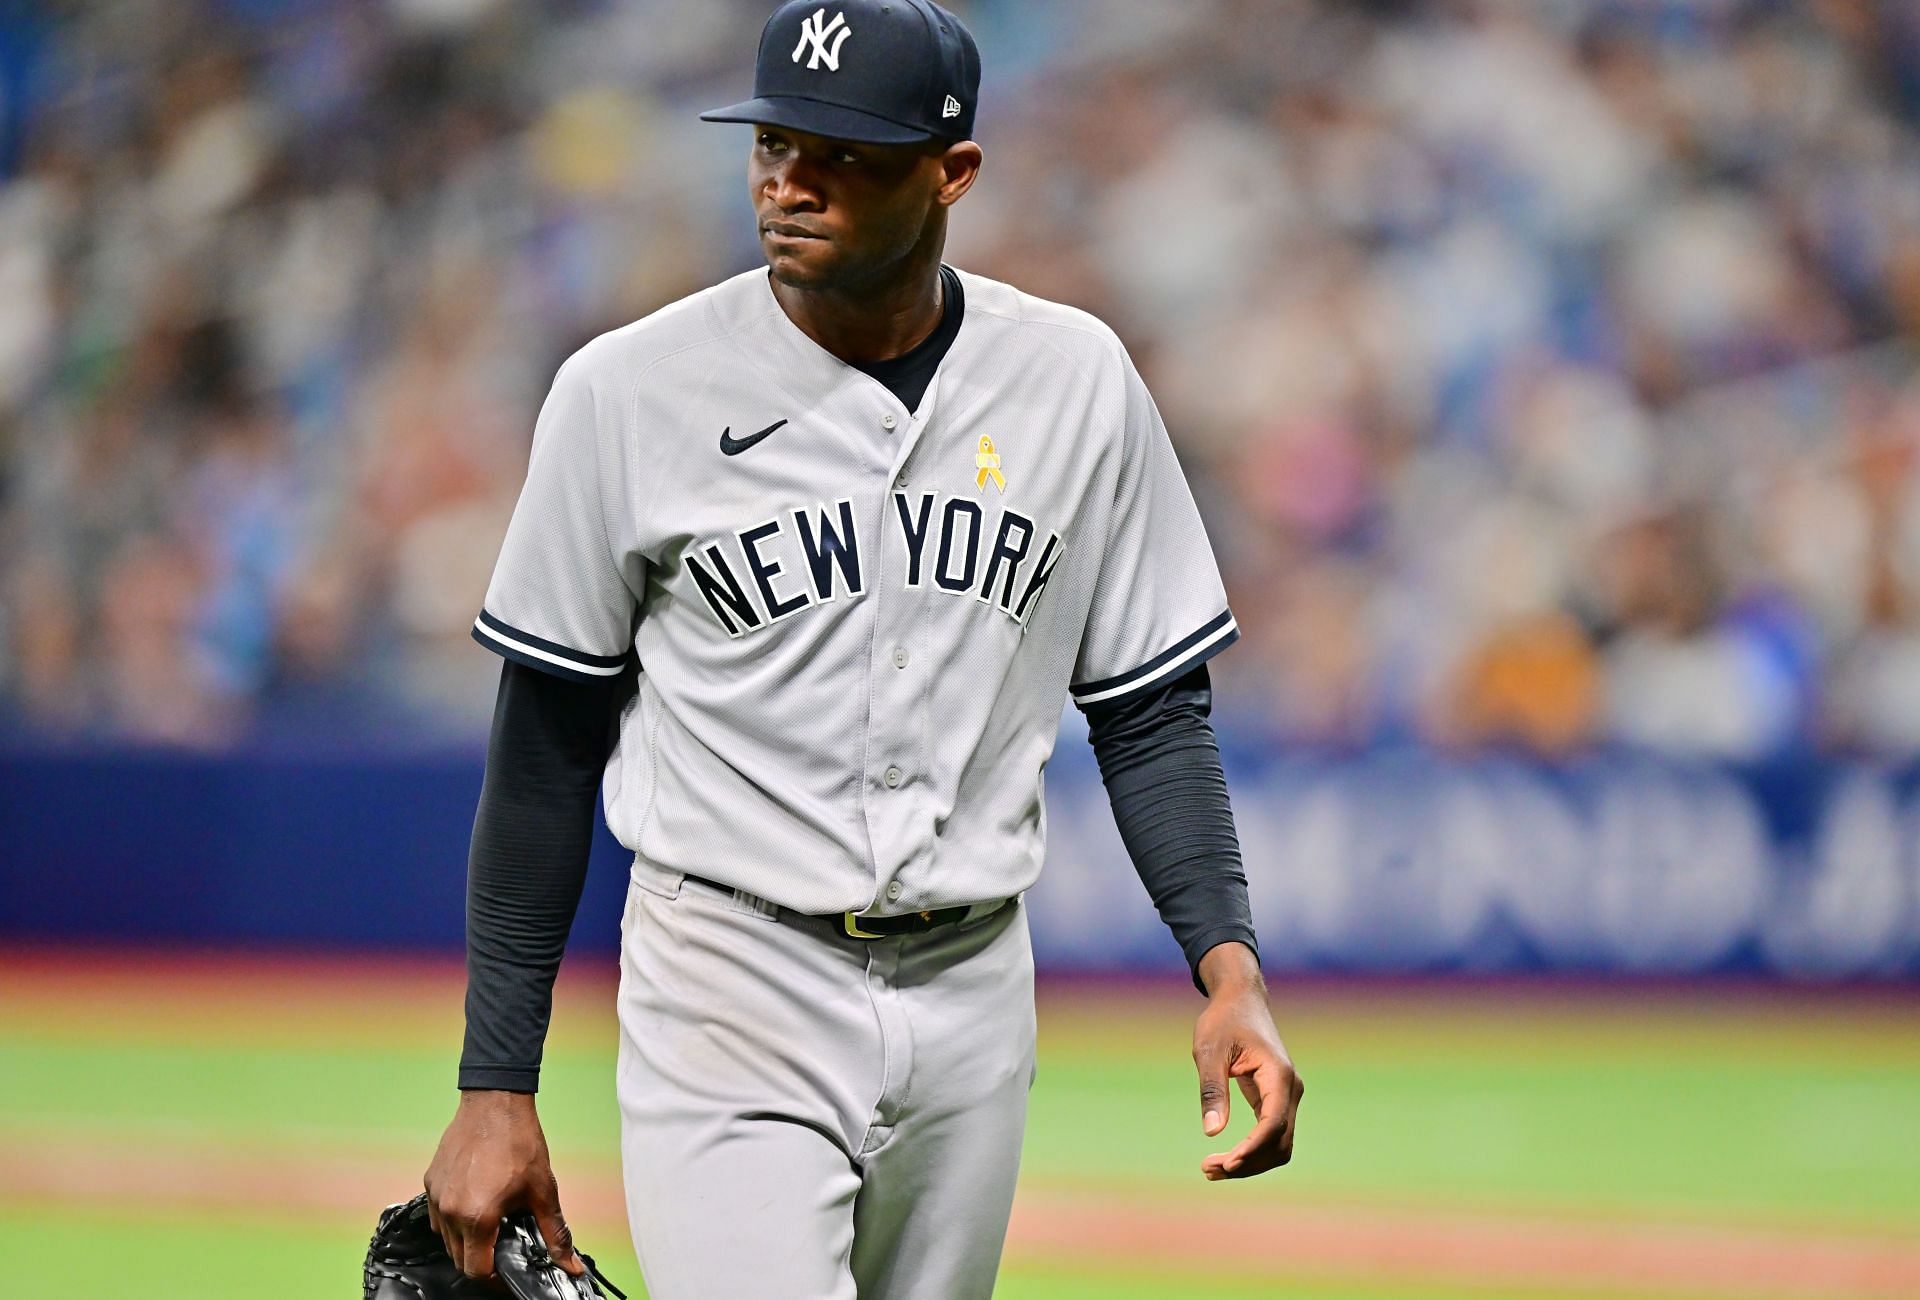 Yankees pitcher Frankie Montas admits to pre-existing injury before trade